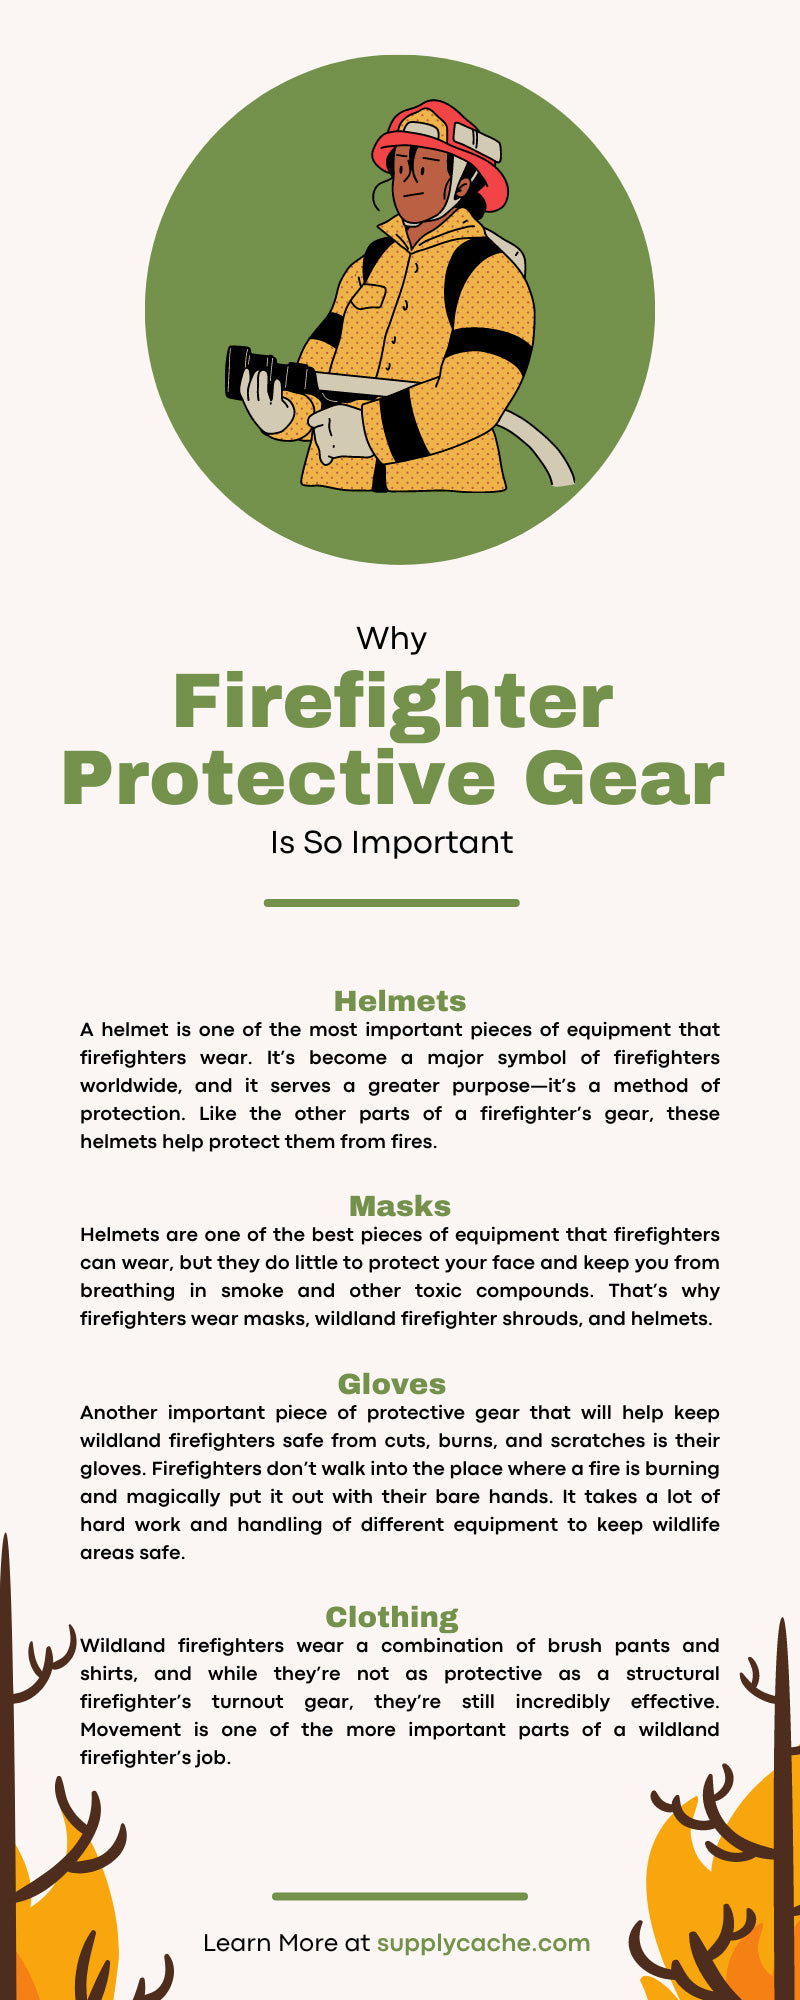 Why Firefighter Protective Gear Is So Important